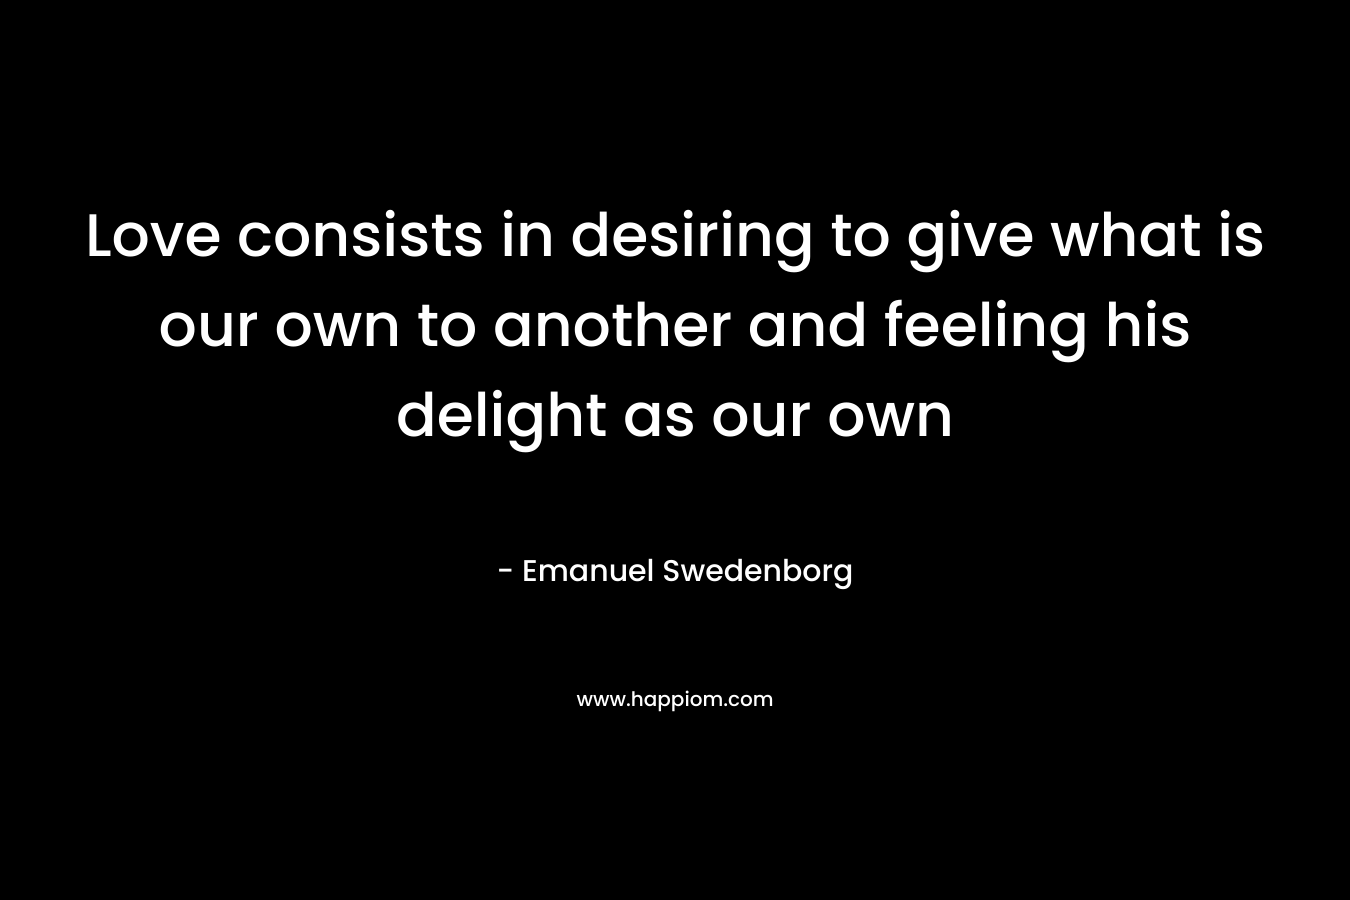 Love consists in desiring to give what is our own to another and feeling his delight as our own – Emanuel Swedenborg